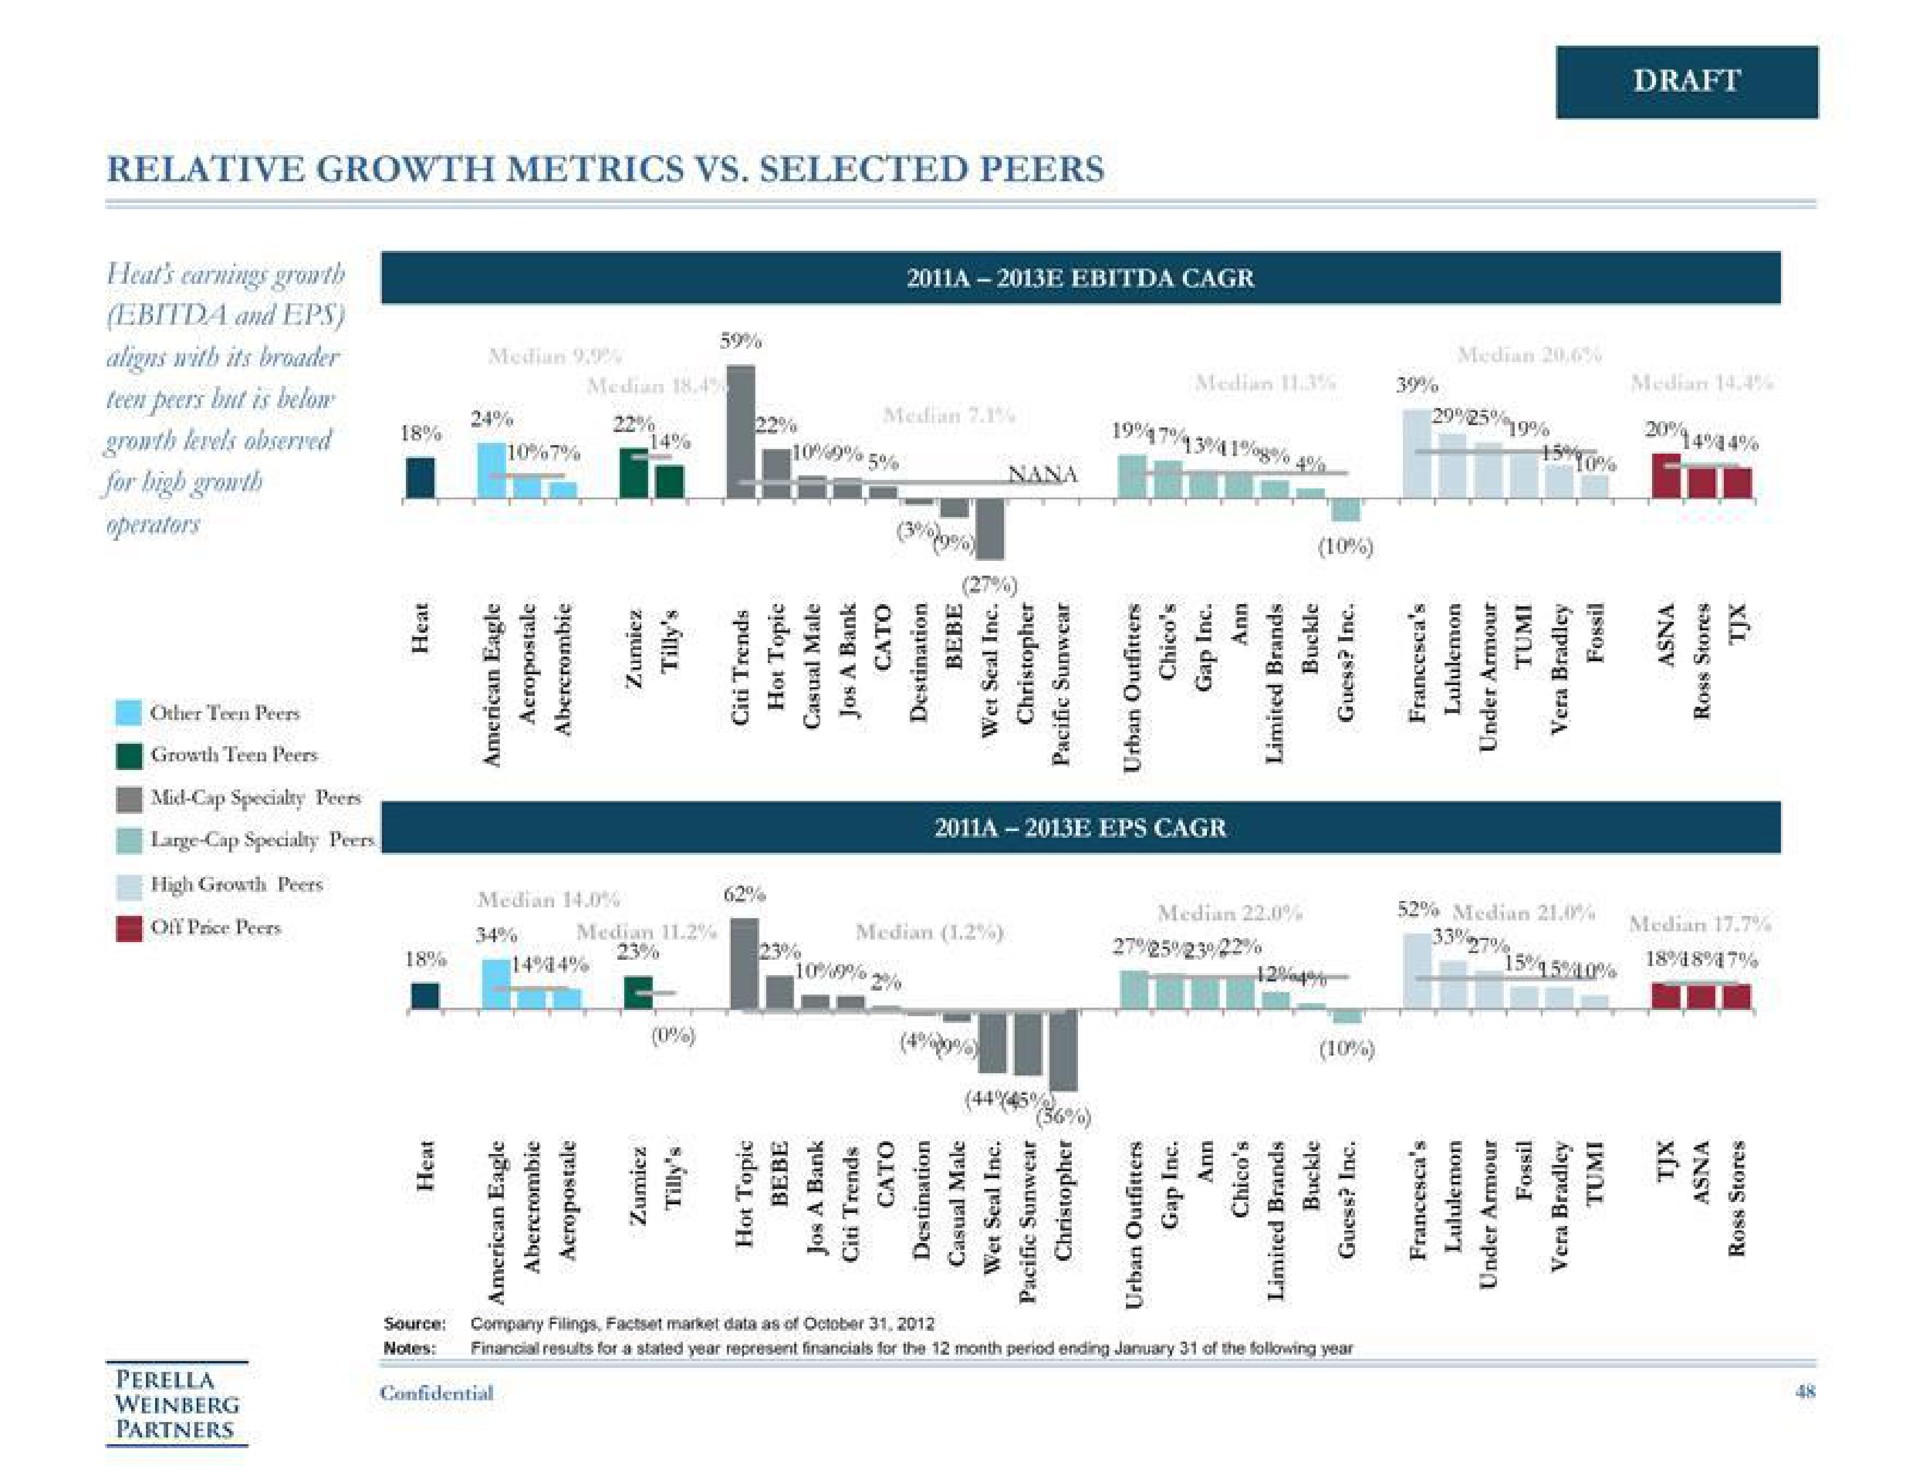 relative growth metrics selected peers draft a has a zee zat cess me sess fee ary a ses a see a a | Perella Weinberg Partners